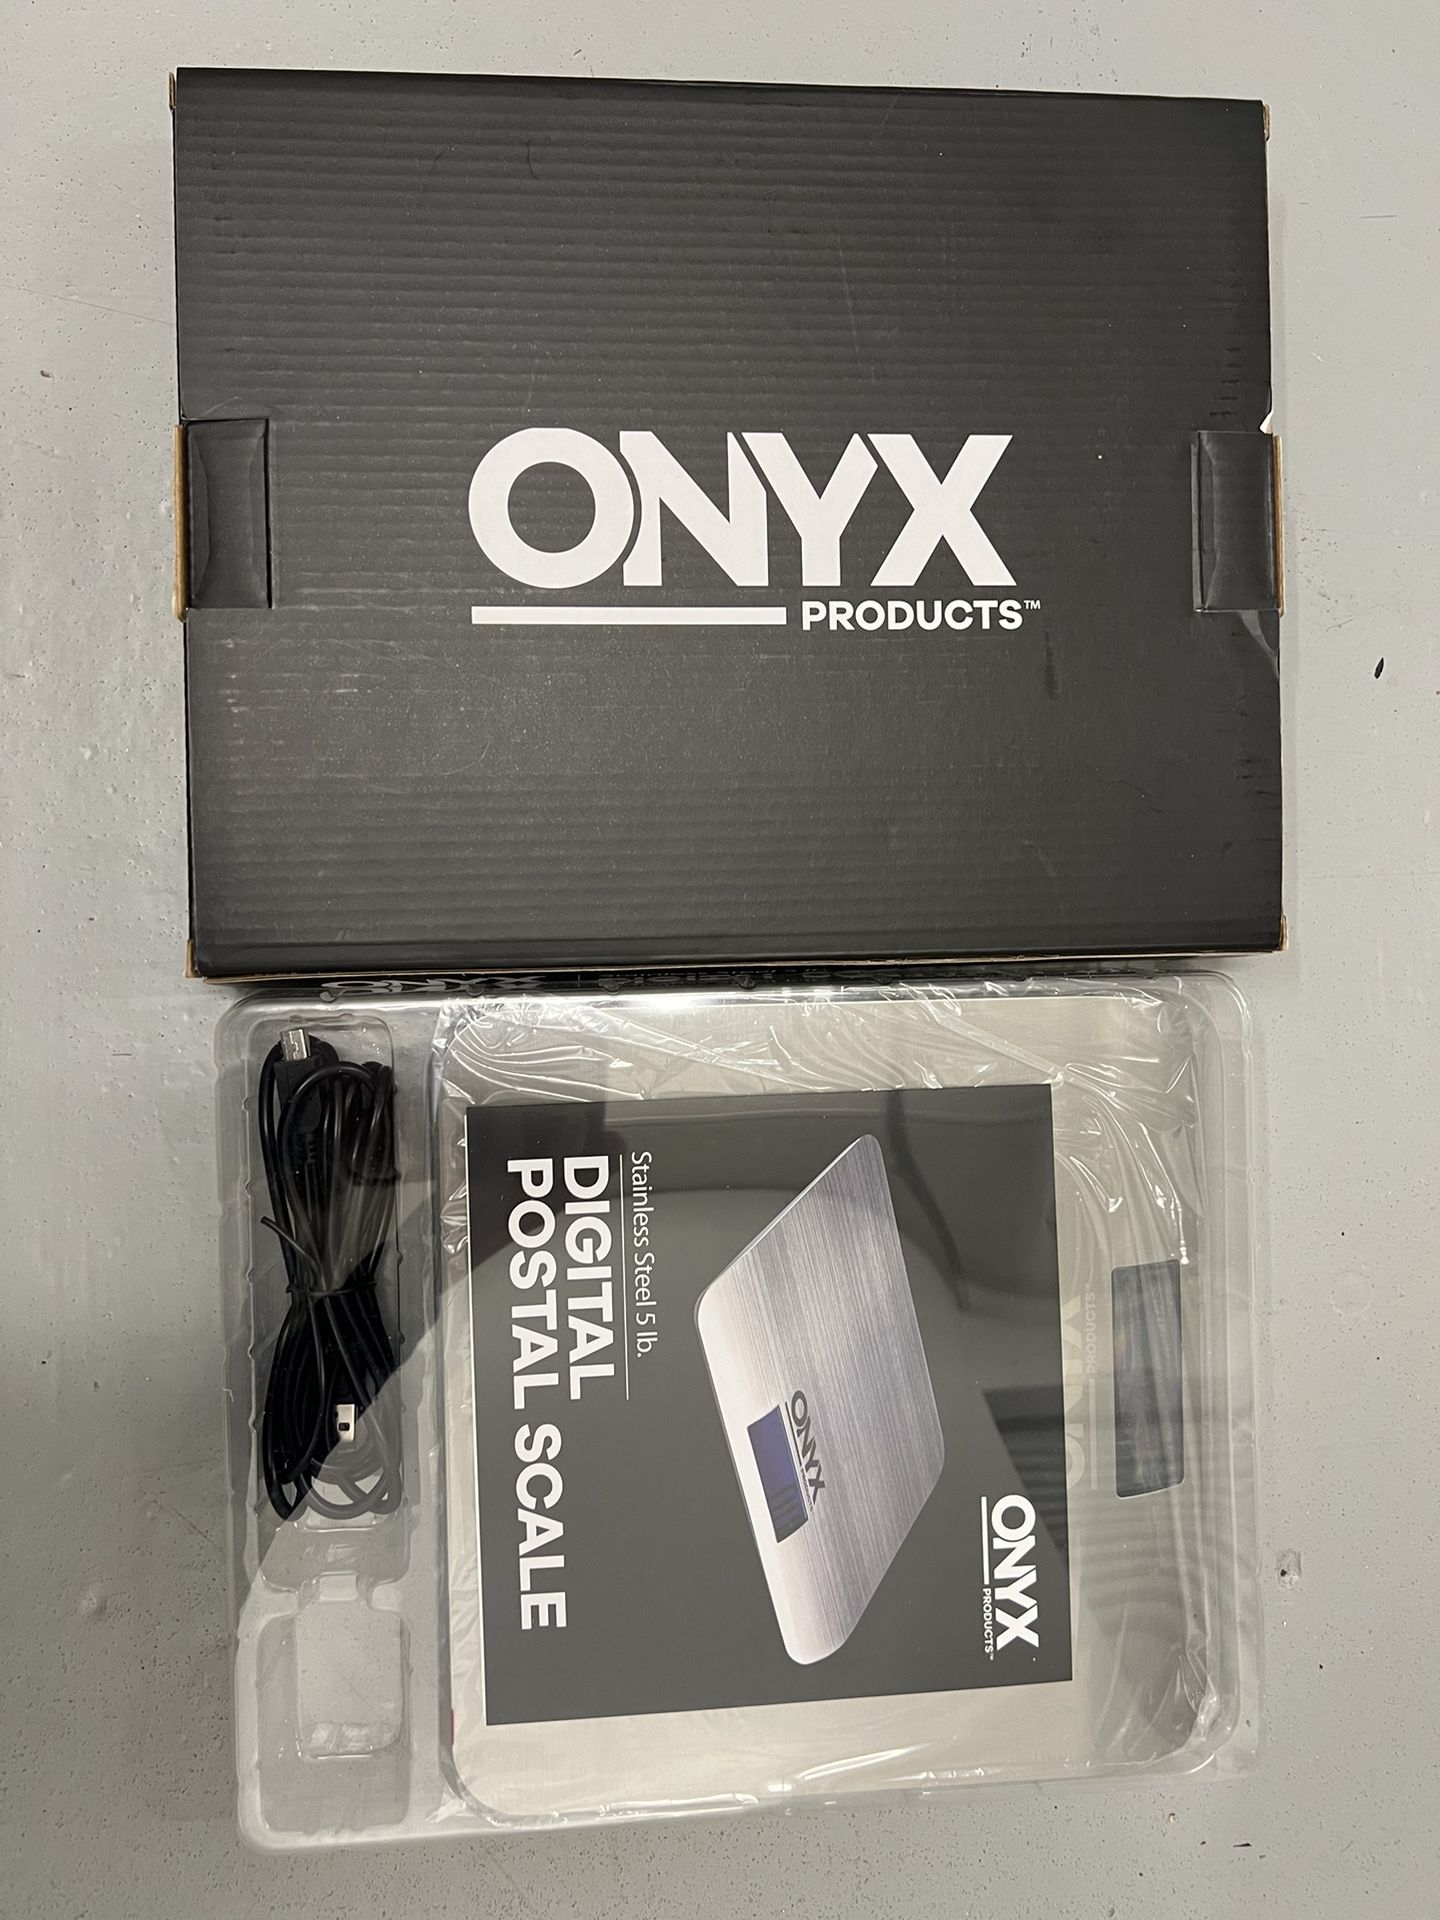 ONYX Digital Postal Scale 5 lb Stainless Steel USB Powered NEW in Box